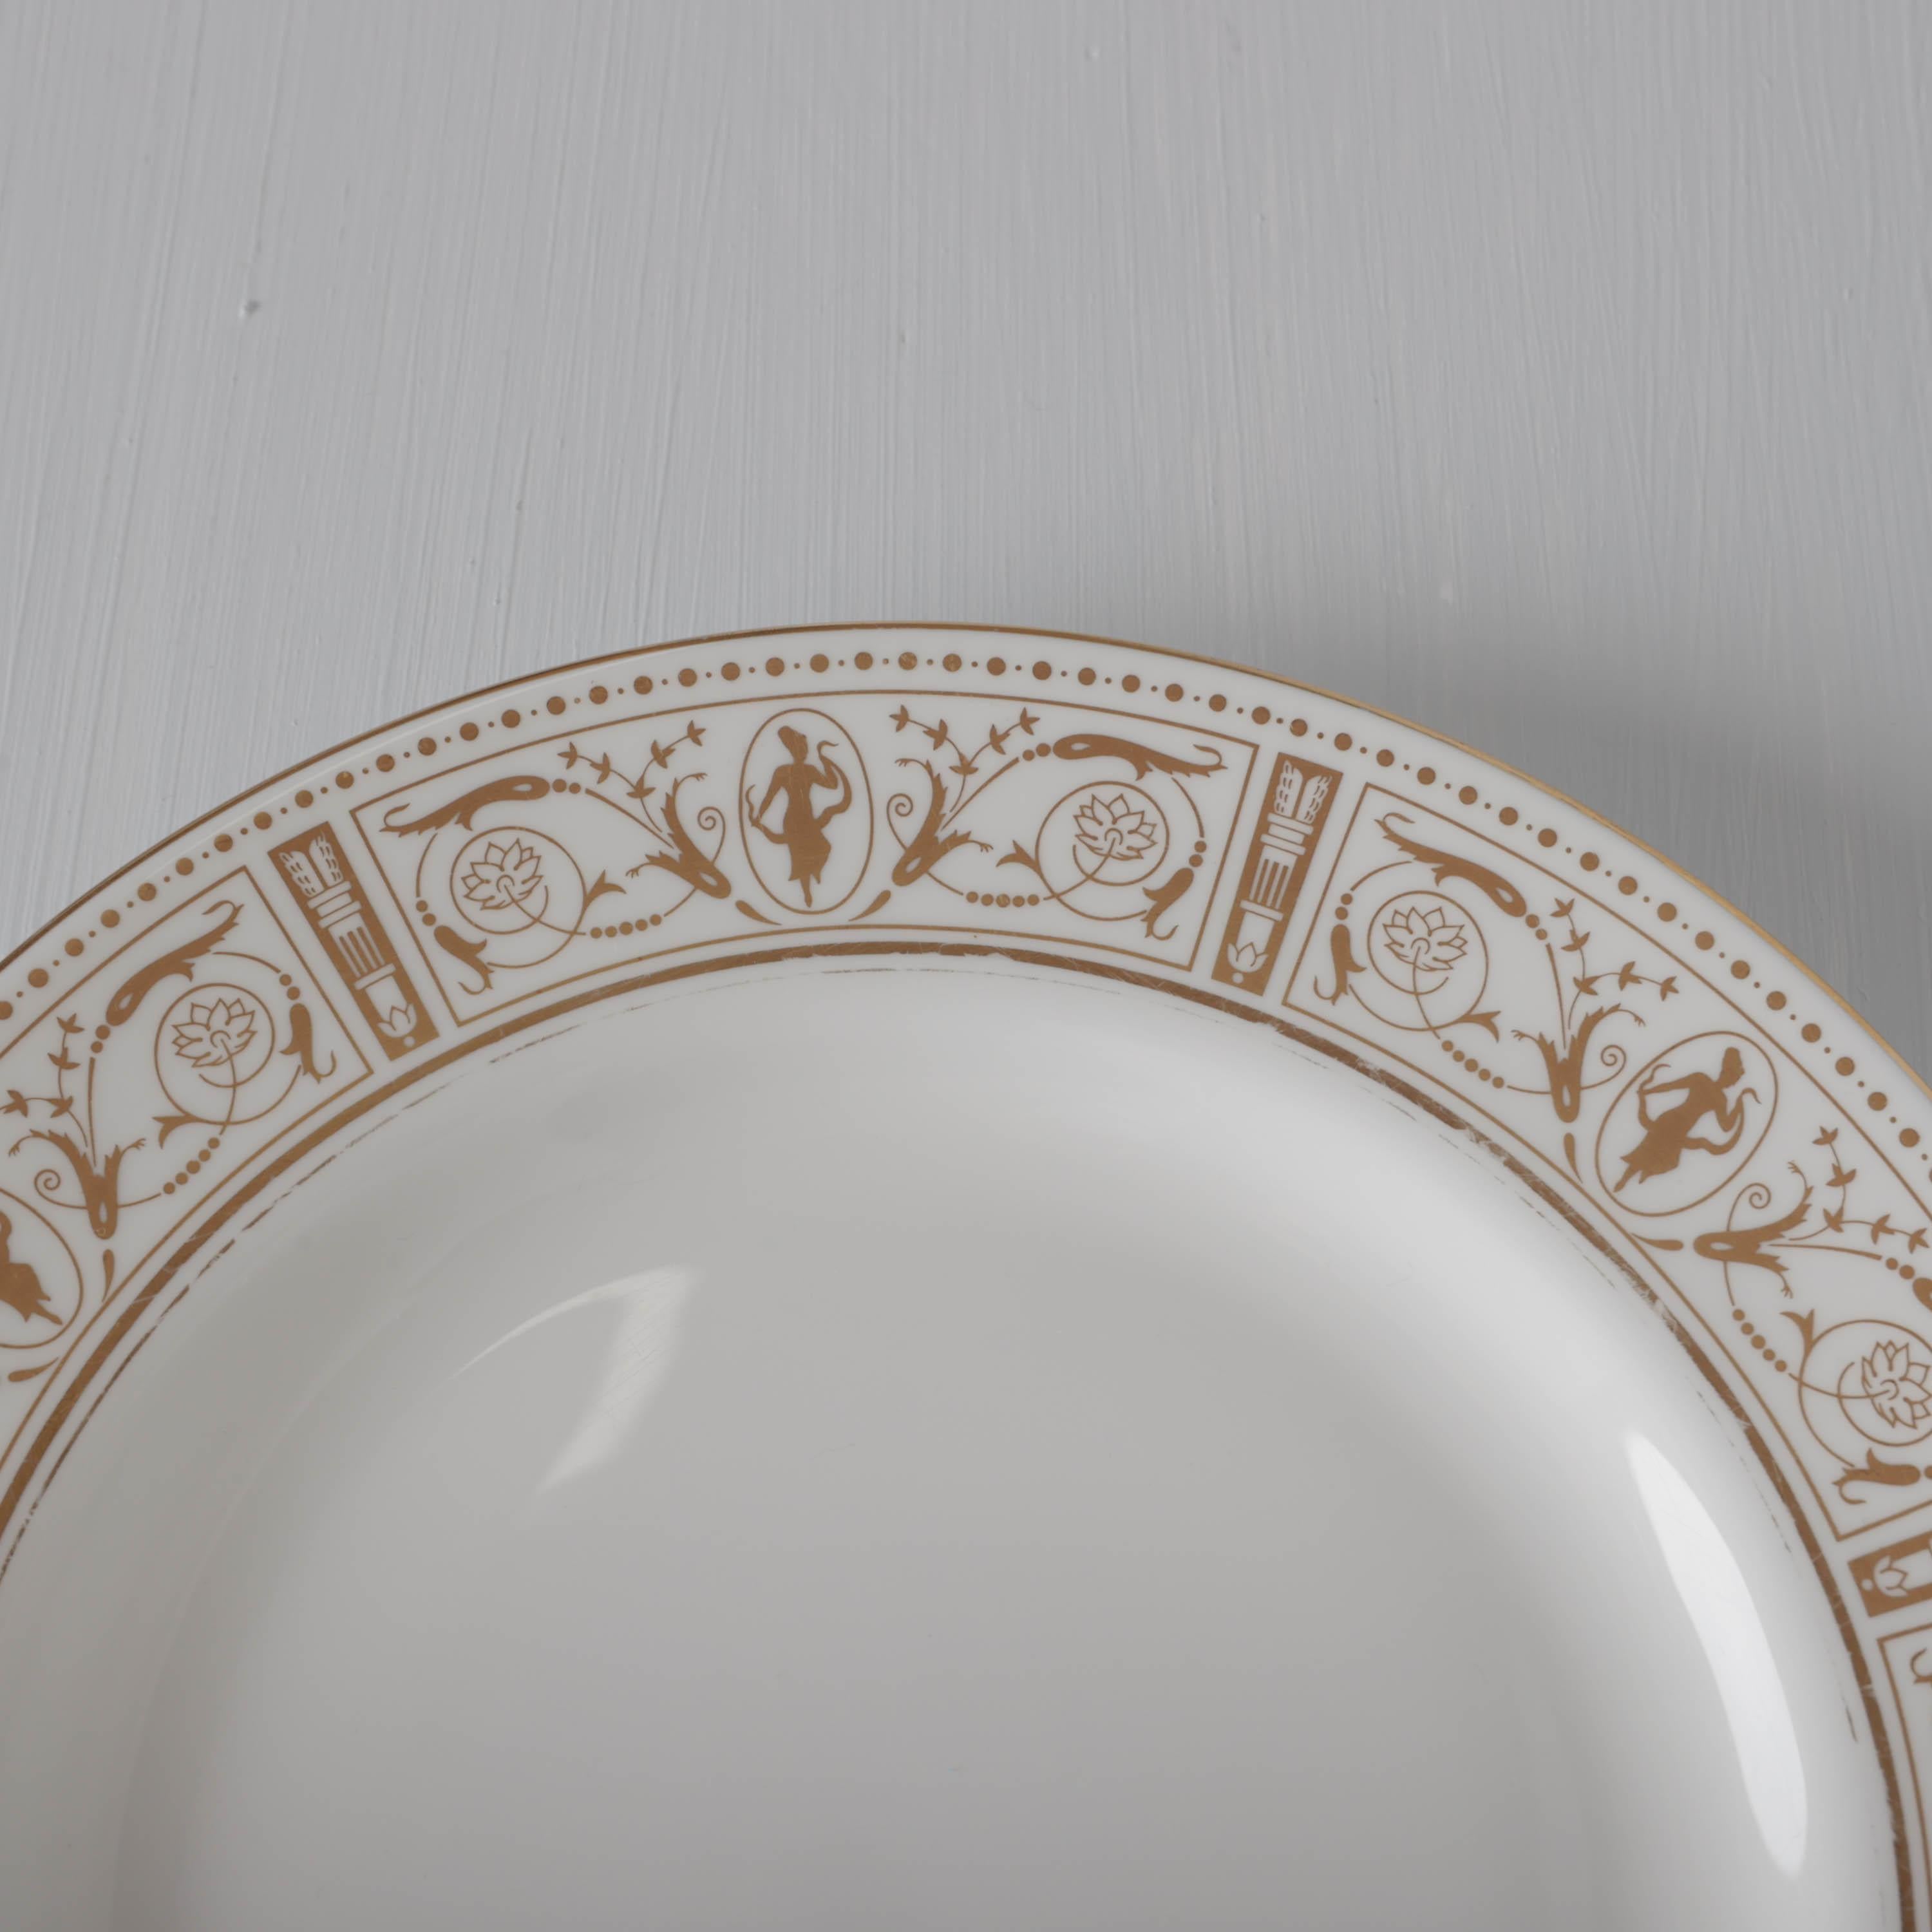 China Service for 12 Wedgewood Gold Grecian Circa 1964 For Sale 5